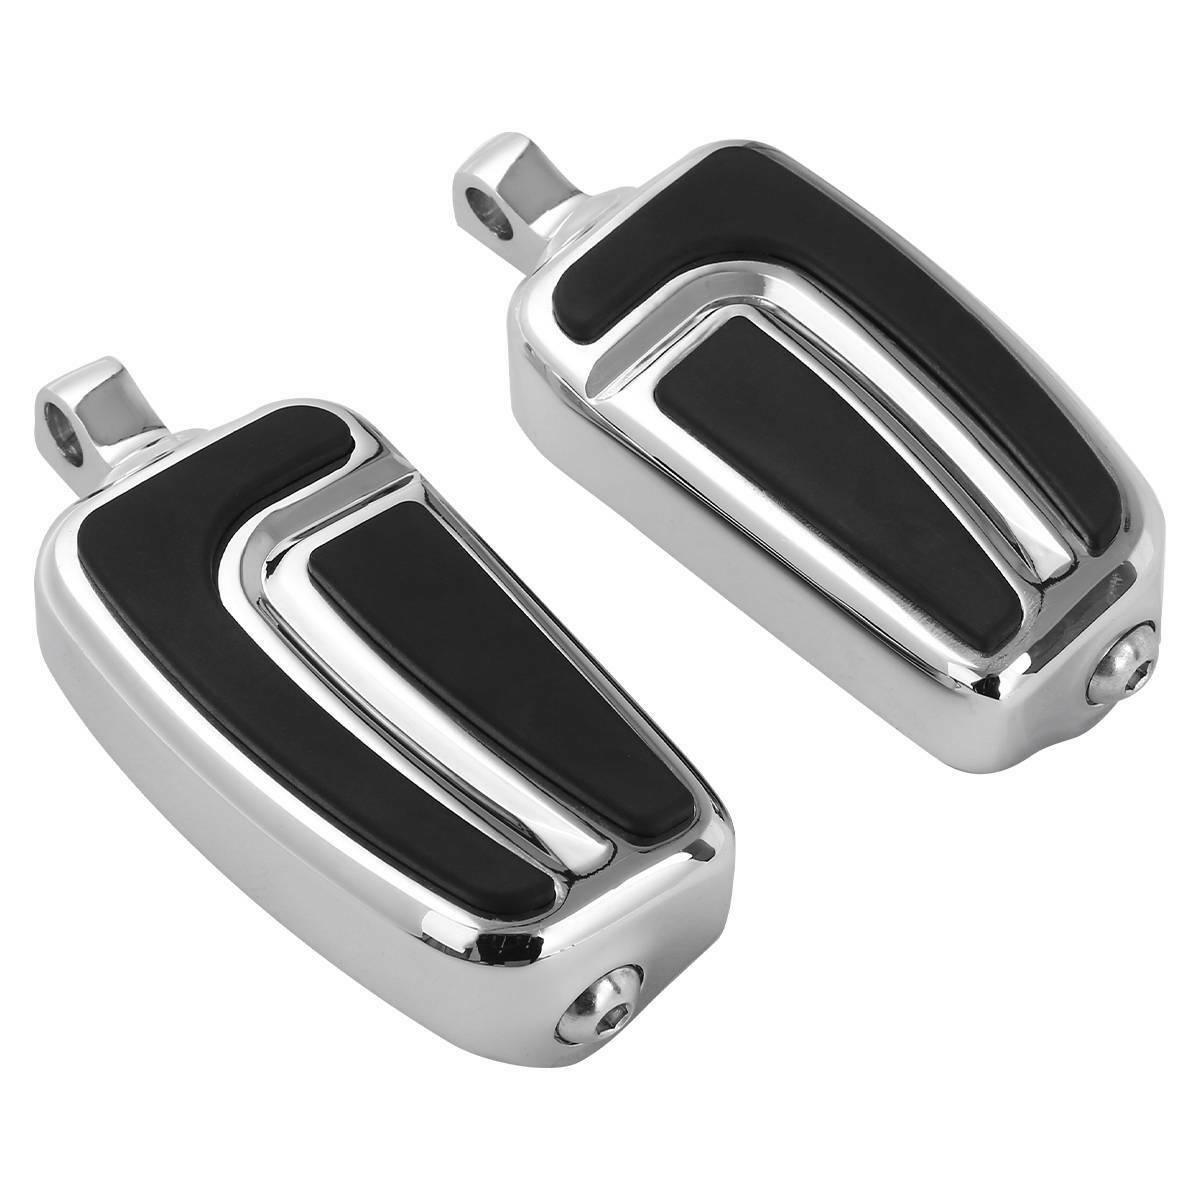 10mm Male Mount Airflow Pegs Footpegs Fit For Harley Touring Sportster 883 1200 - Moto Life Products